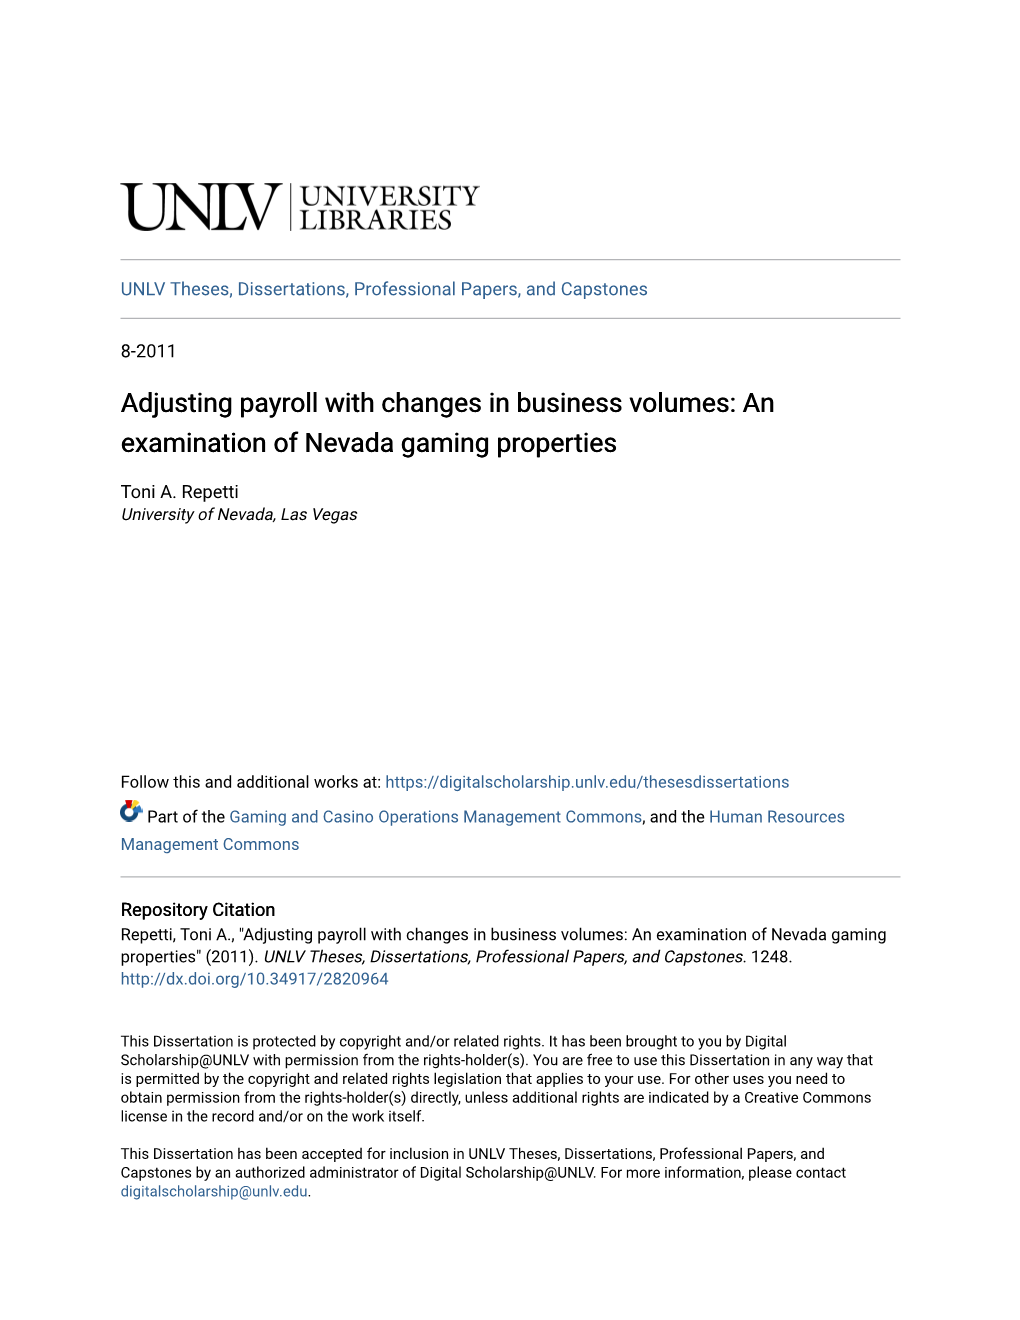 Adjusting Payroll with Changes in Business Volumes: an Examination of Nevada Gaming Properties